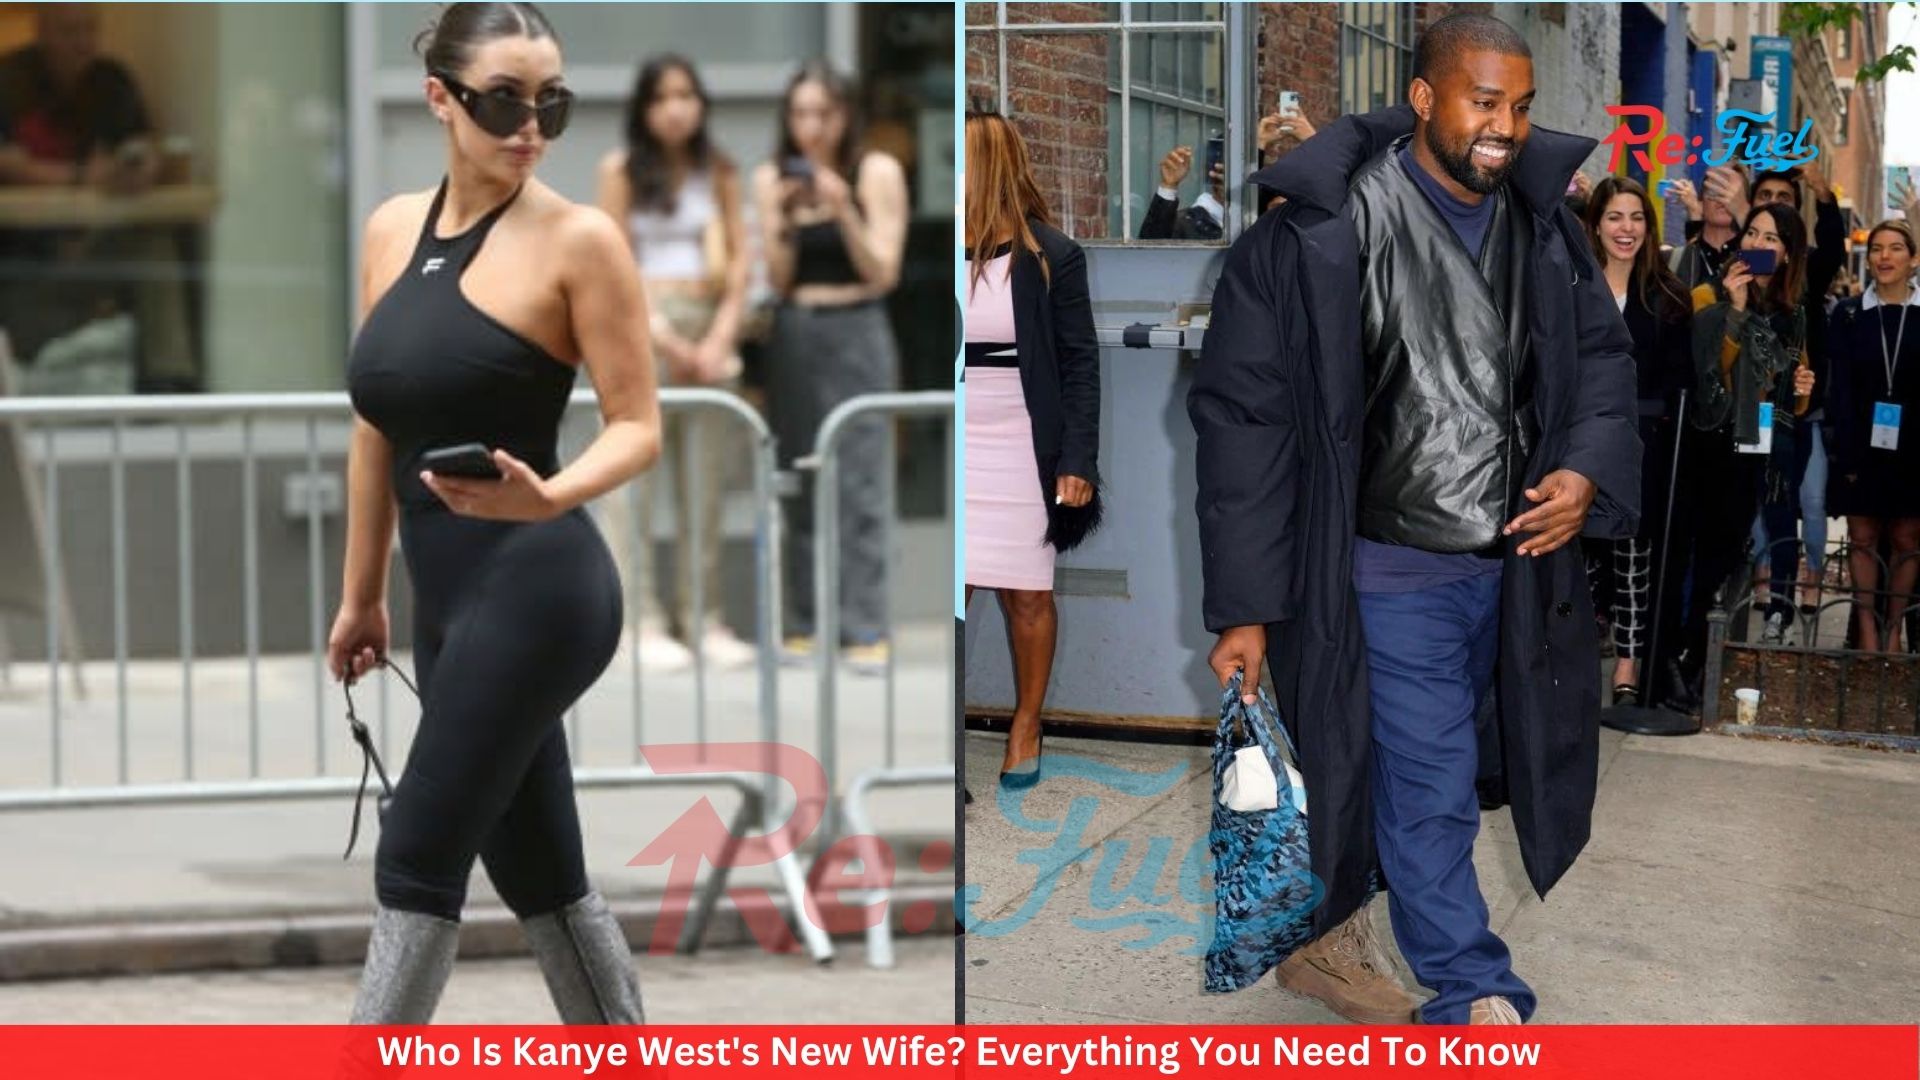 Who Is Kanye West's New Wife? Everything You Need To Know